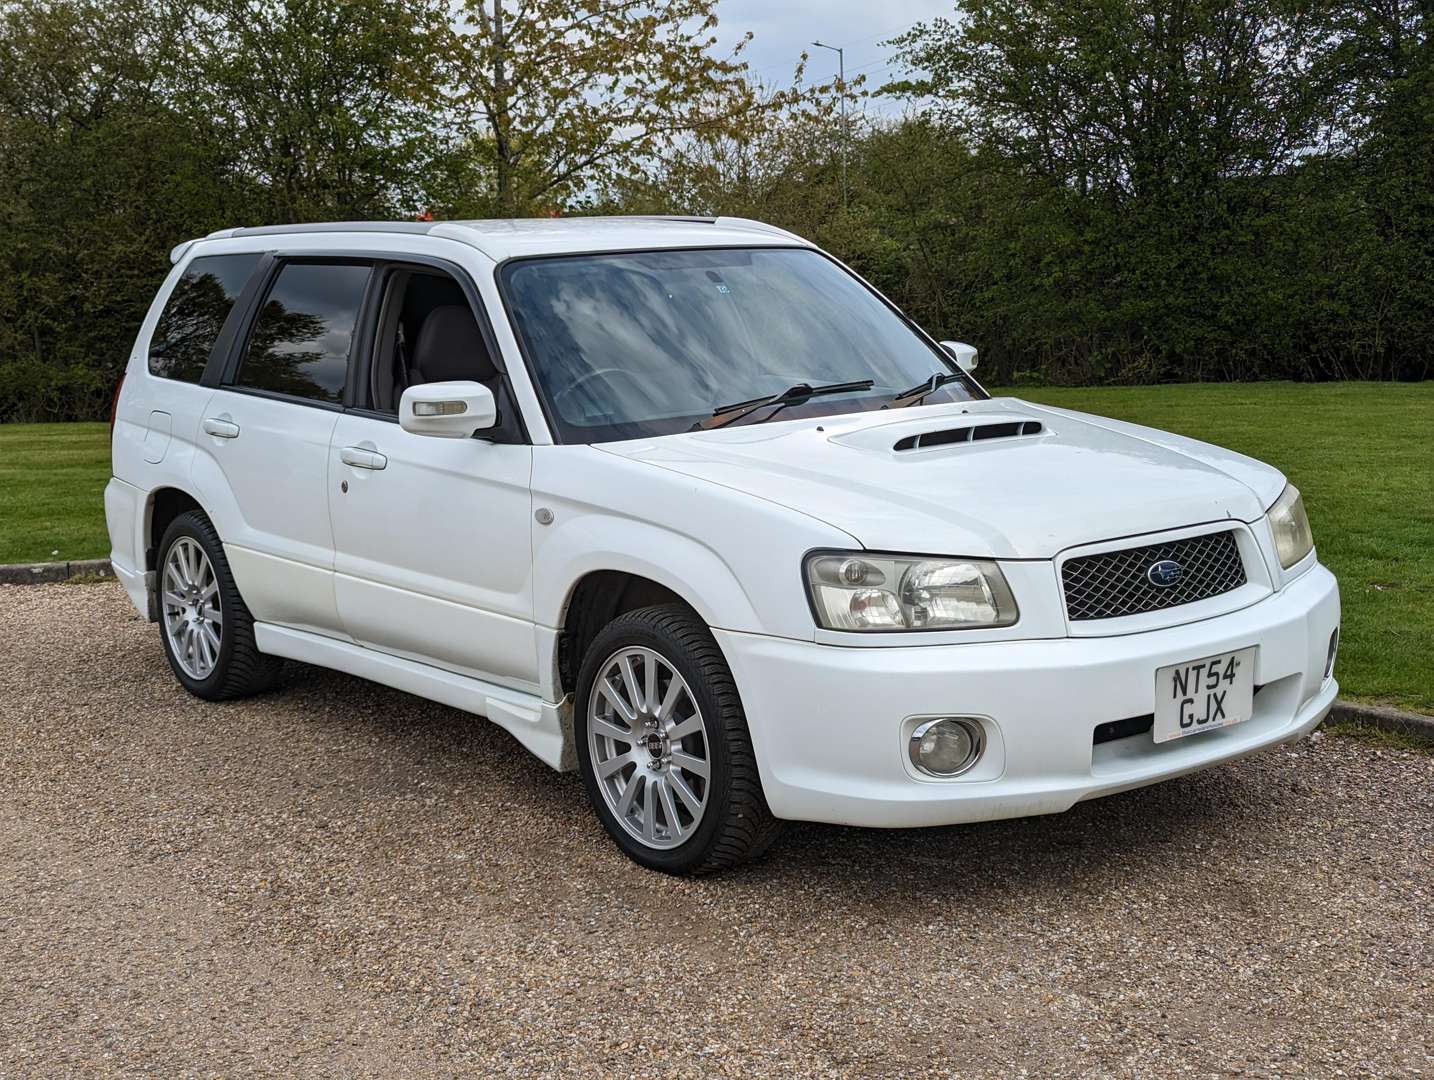 Search results for: 'forester cross sports